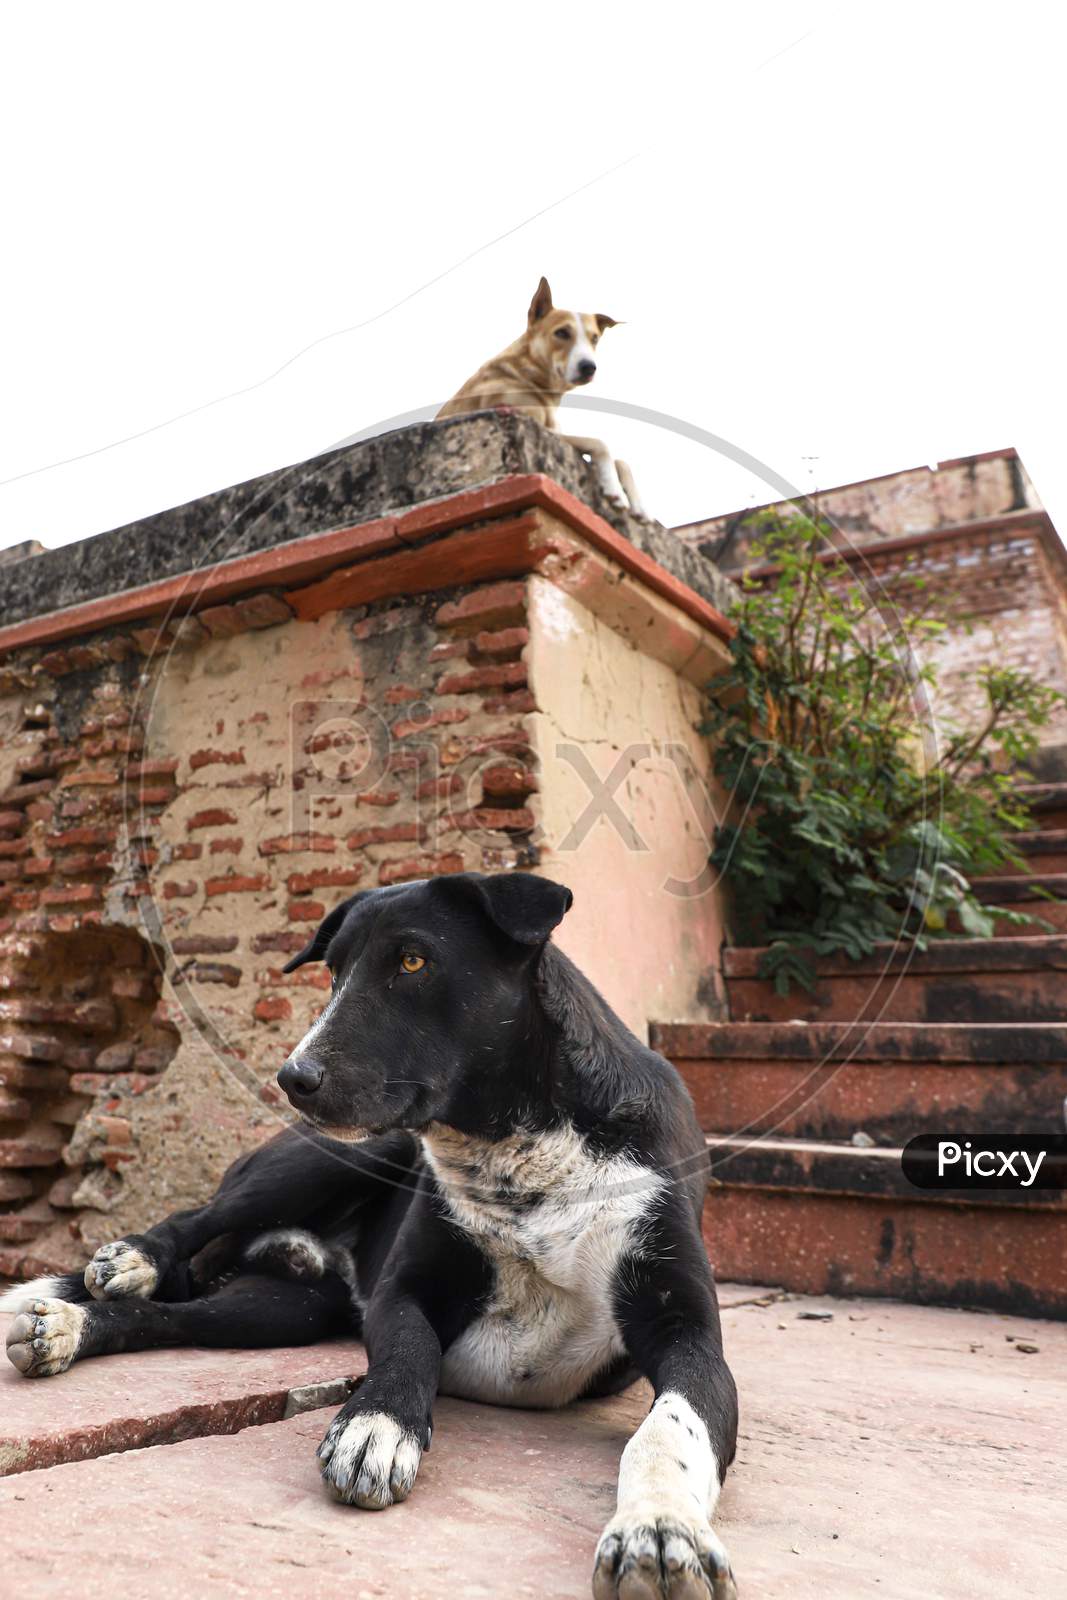 a street dog is sitting outside the old ruined house